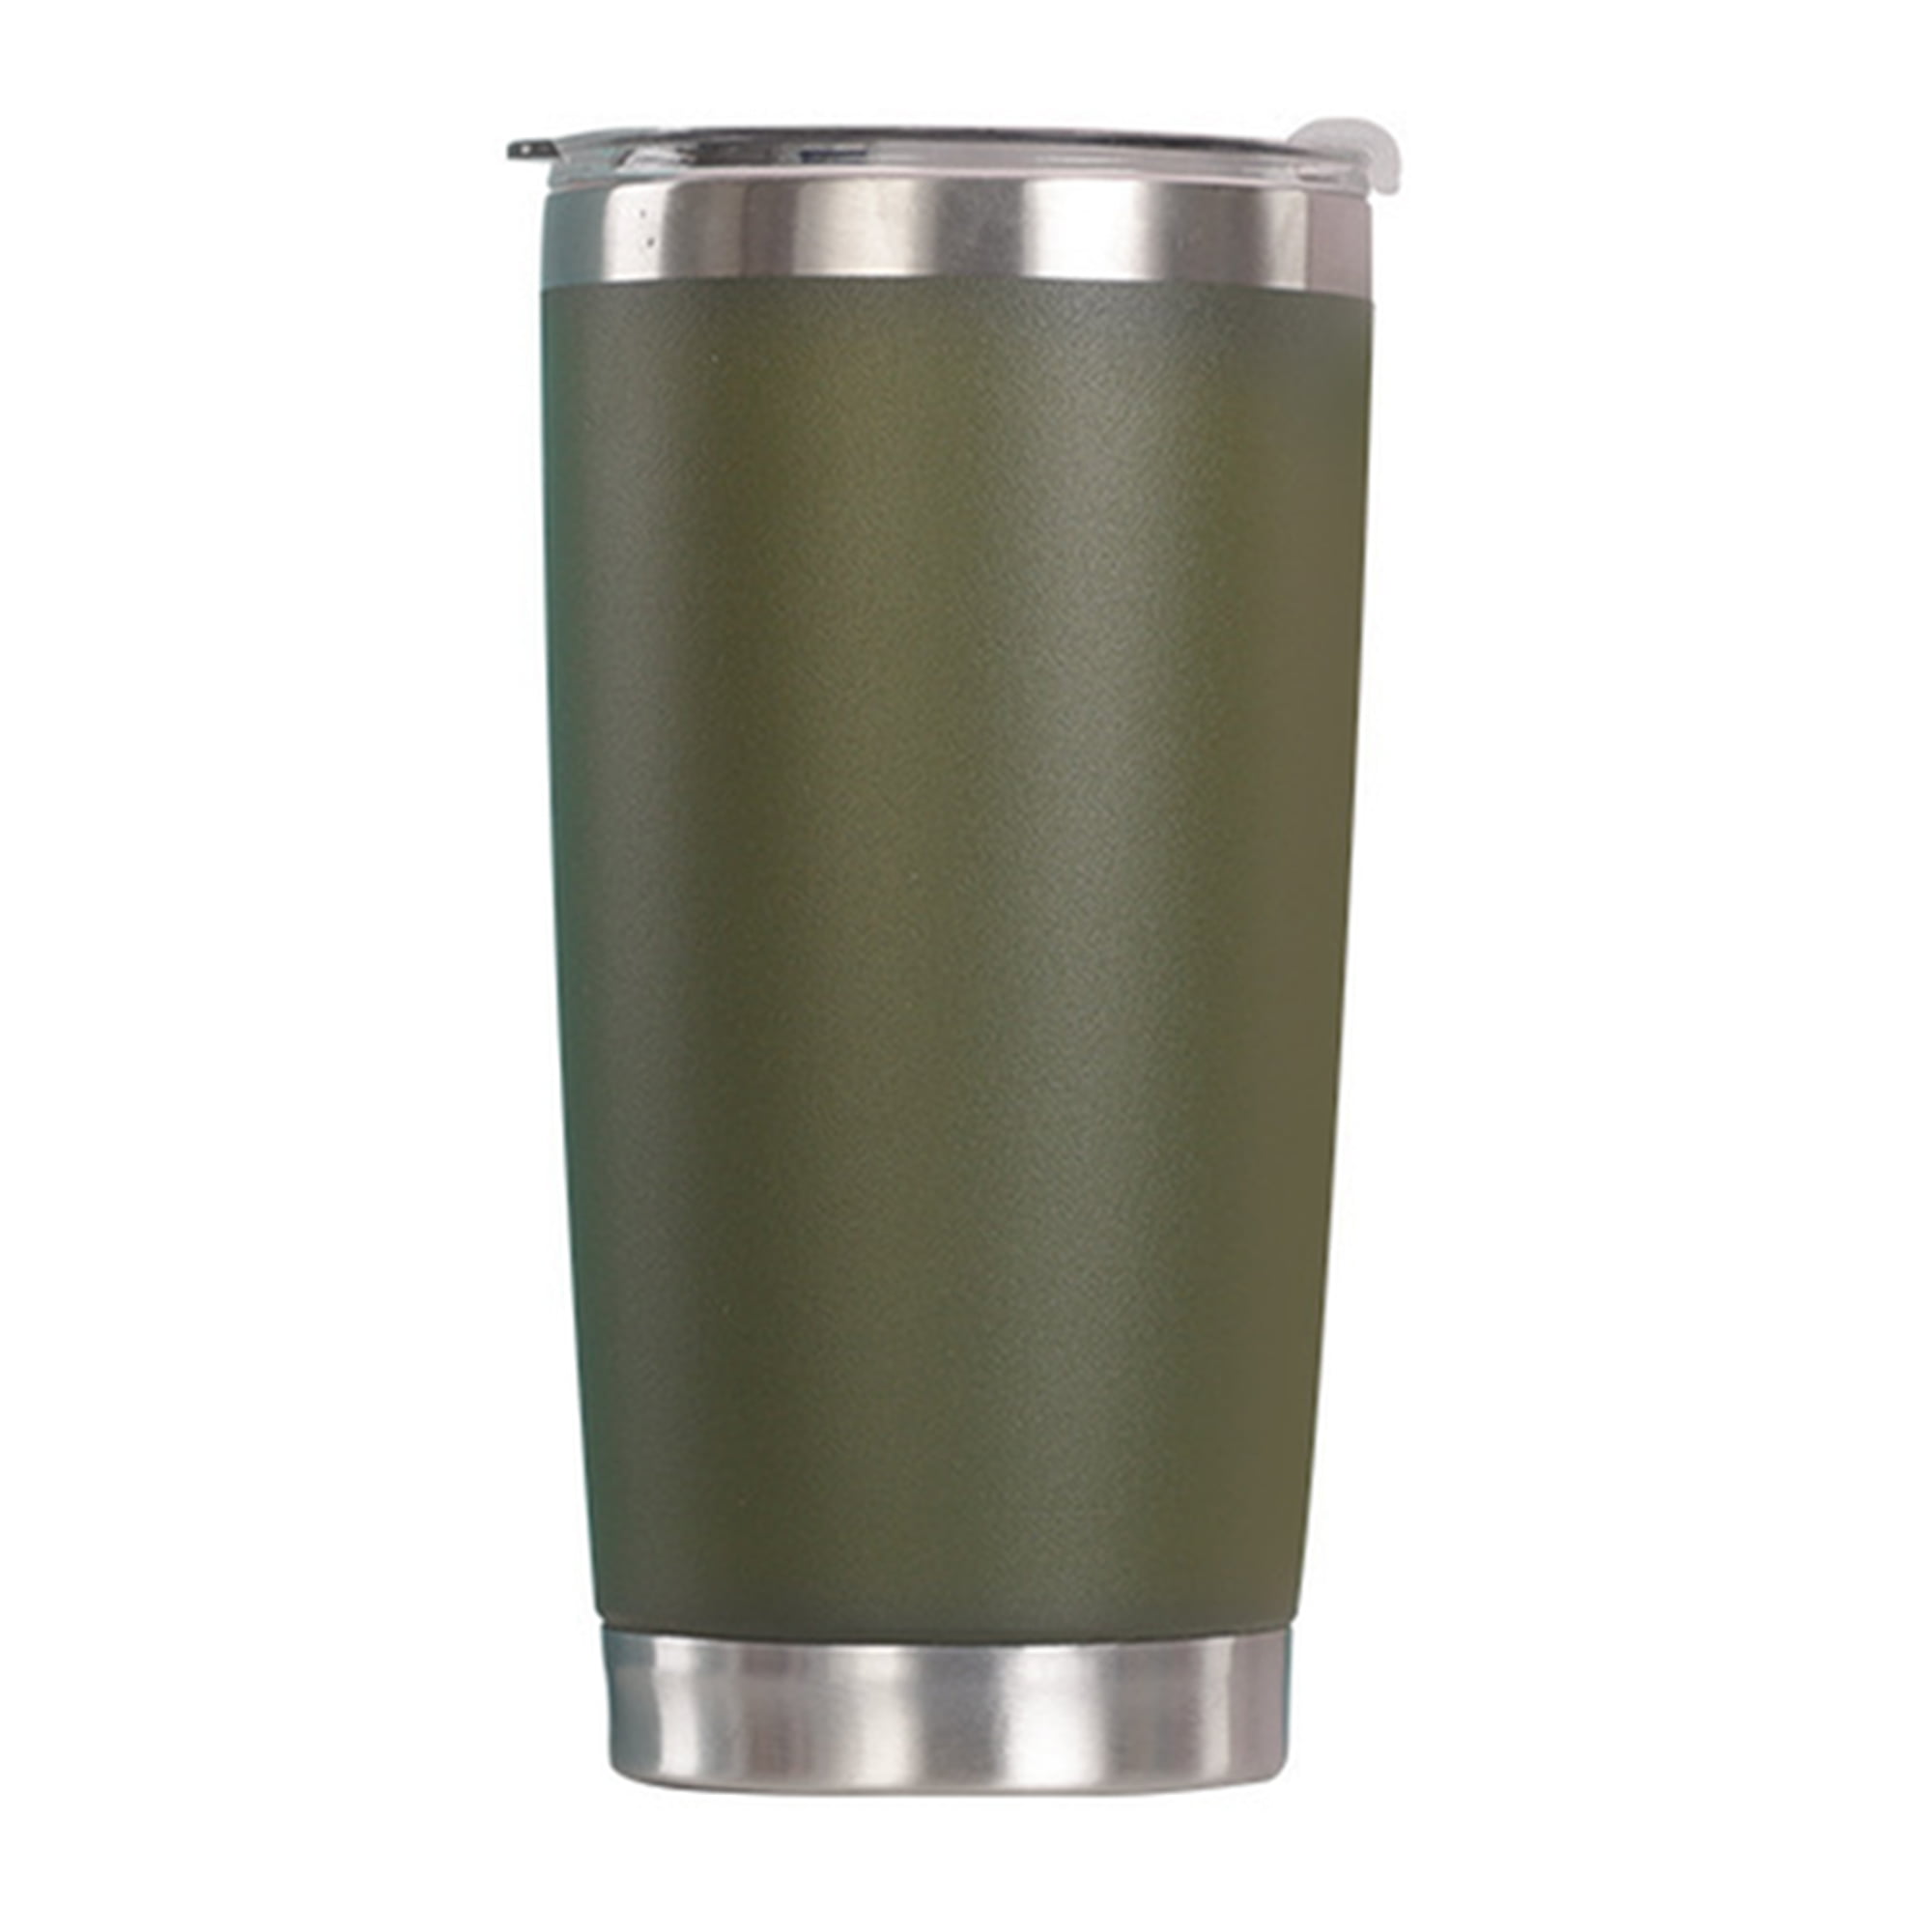 Sivaphe Insulated Tumbler Stainless Steel 12 fl.oz Hot and Cold Drinking  Cup Double Wall Thermal Tra…See more Sivaphe Insulated Tumbler Stainless